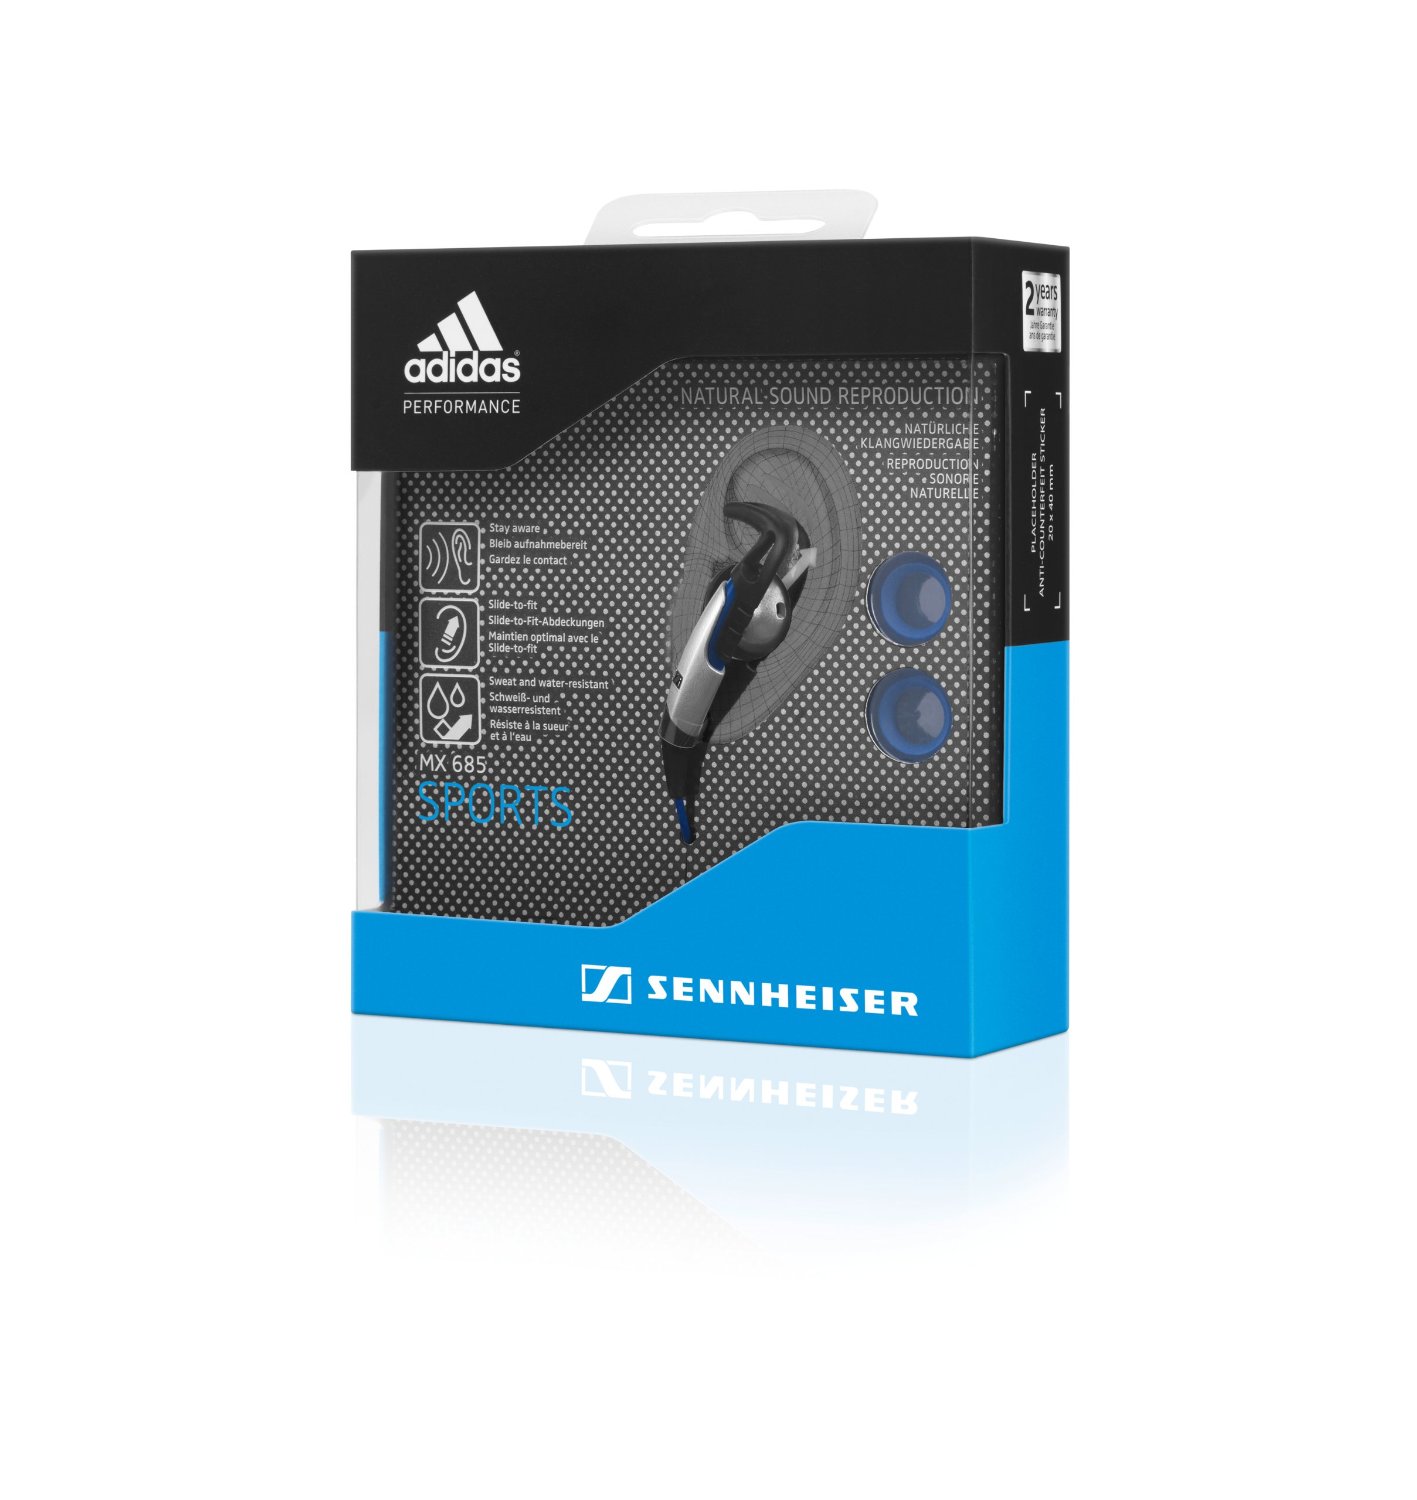 MX685 Adidas Sports In-Ear Headphones - Black - Click Image to Close